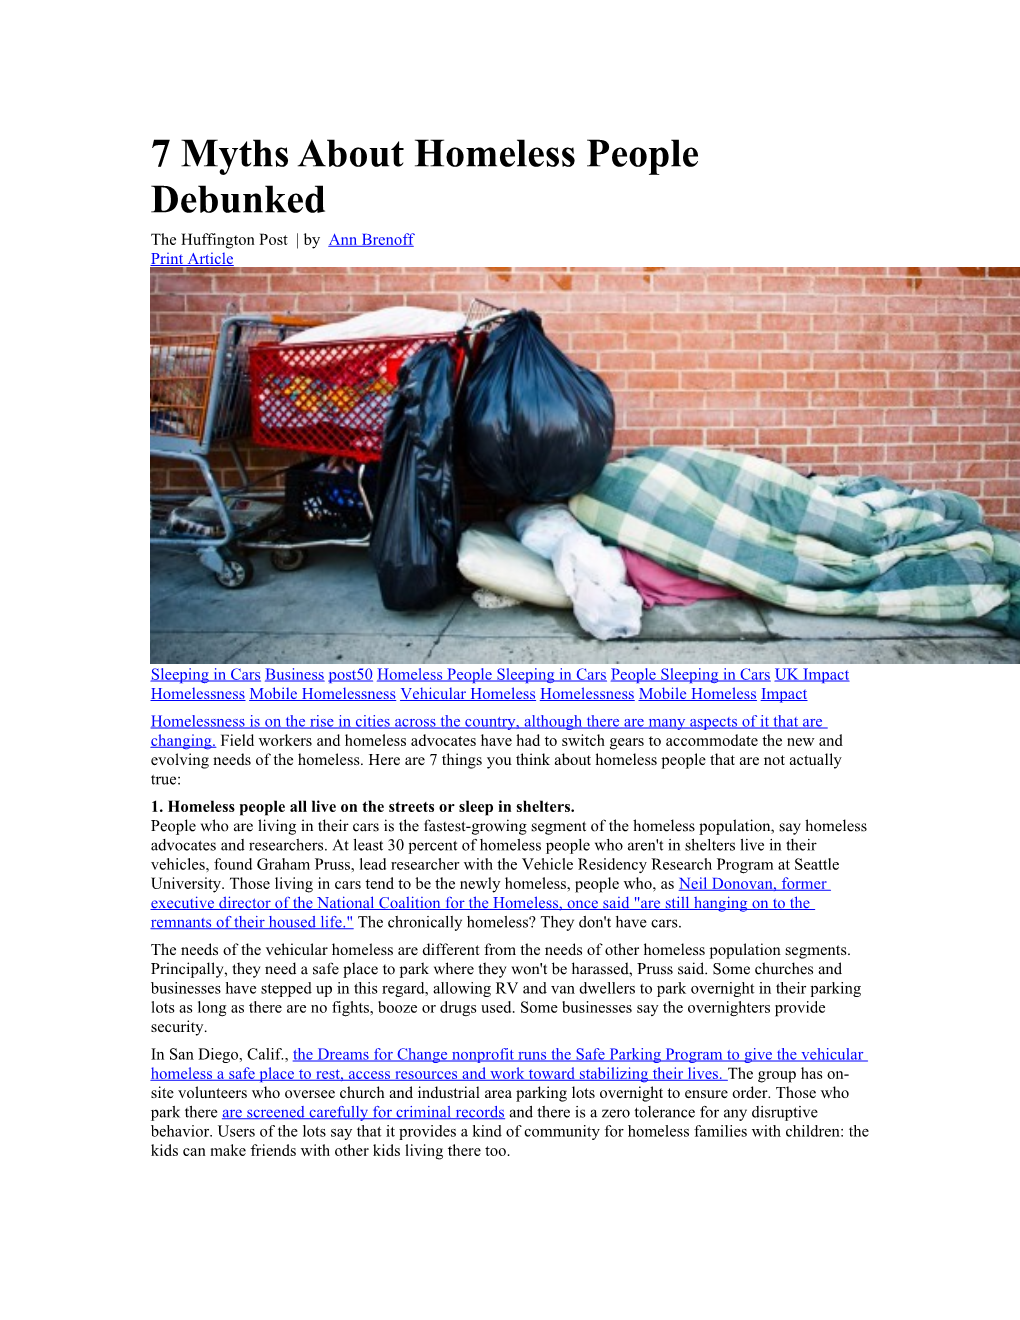 7 Myths About Homeless People Debunked